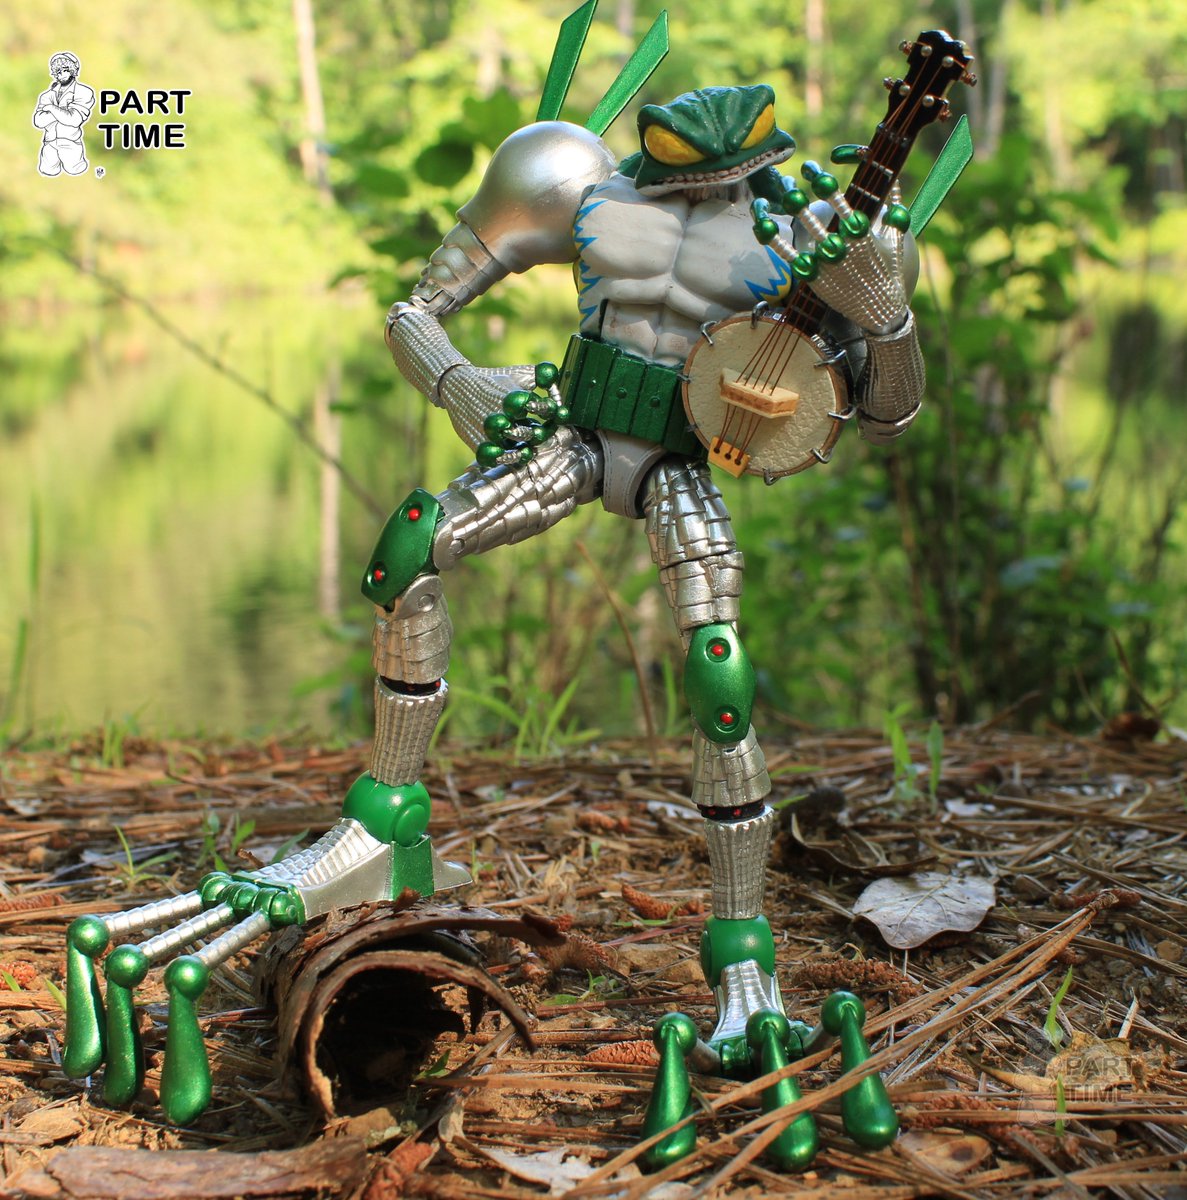 Cyberfrog contemplates the possible future of being the world's first cybernetically enhanced amphibious folk singer.
#cyberfrog #toyphotography #actionfigure #actionfigurephotography  #comicsgate